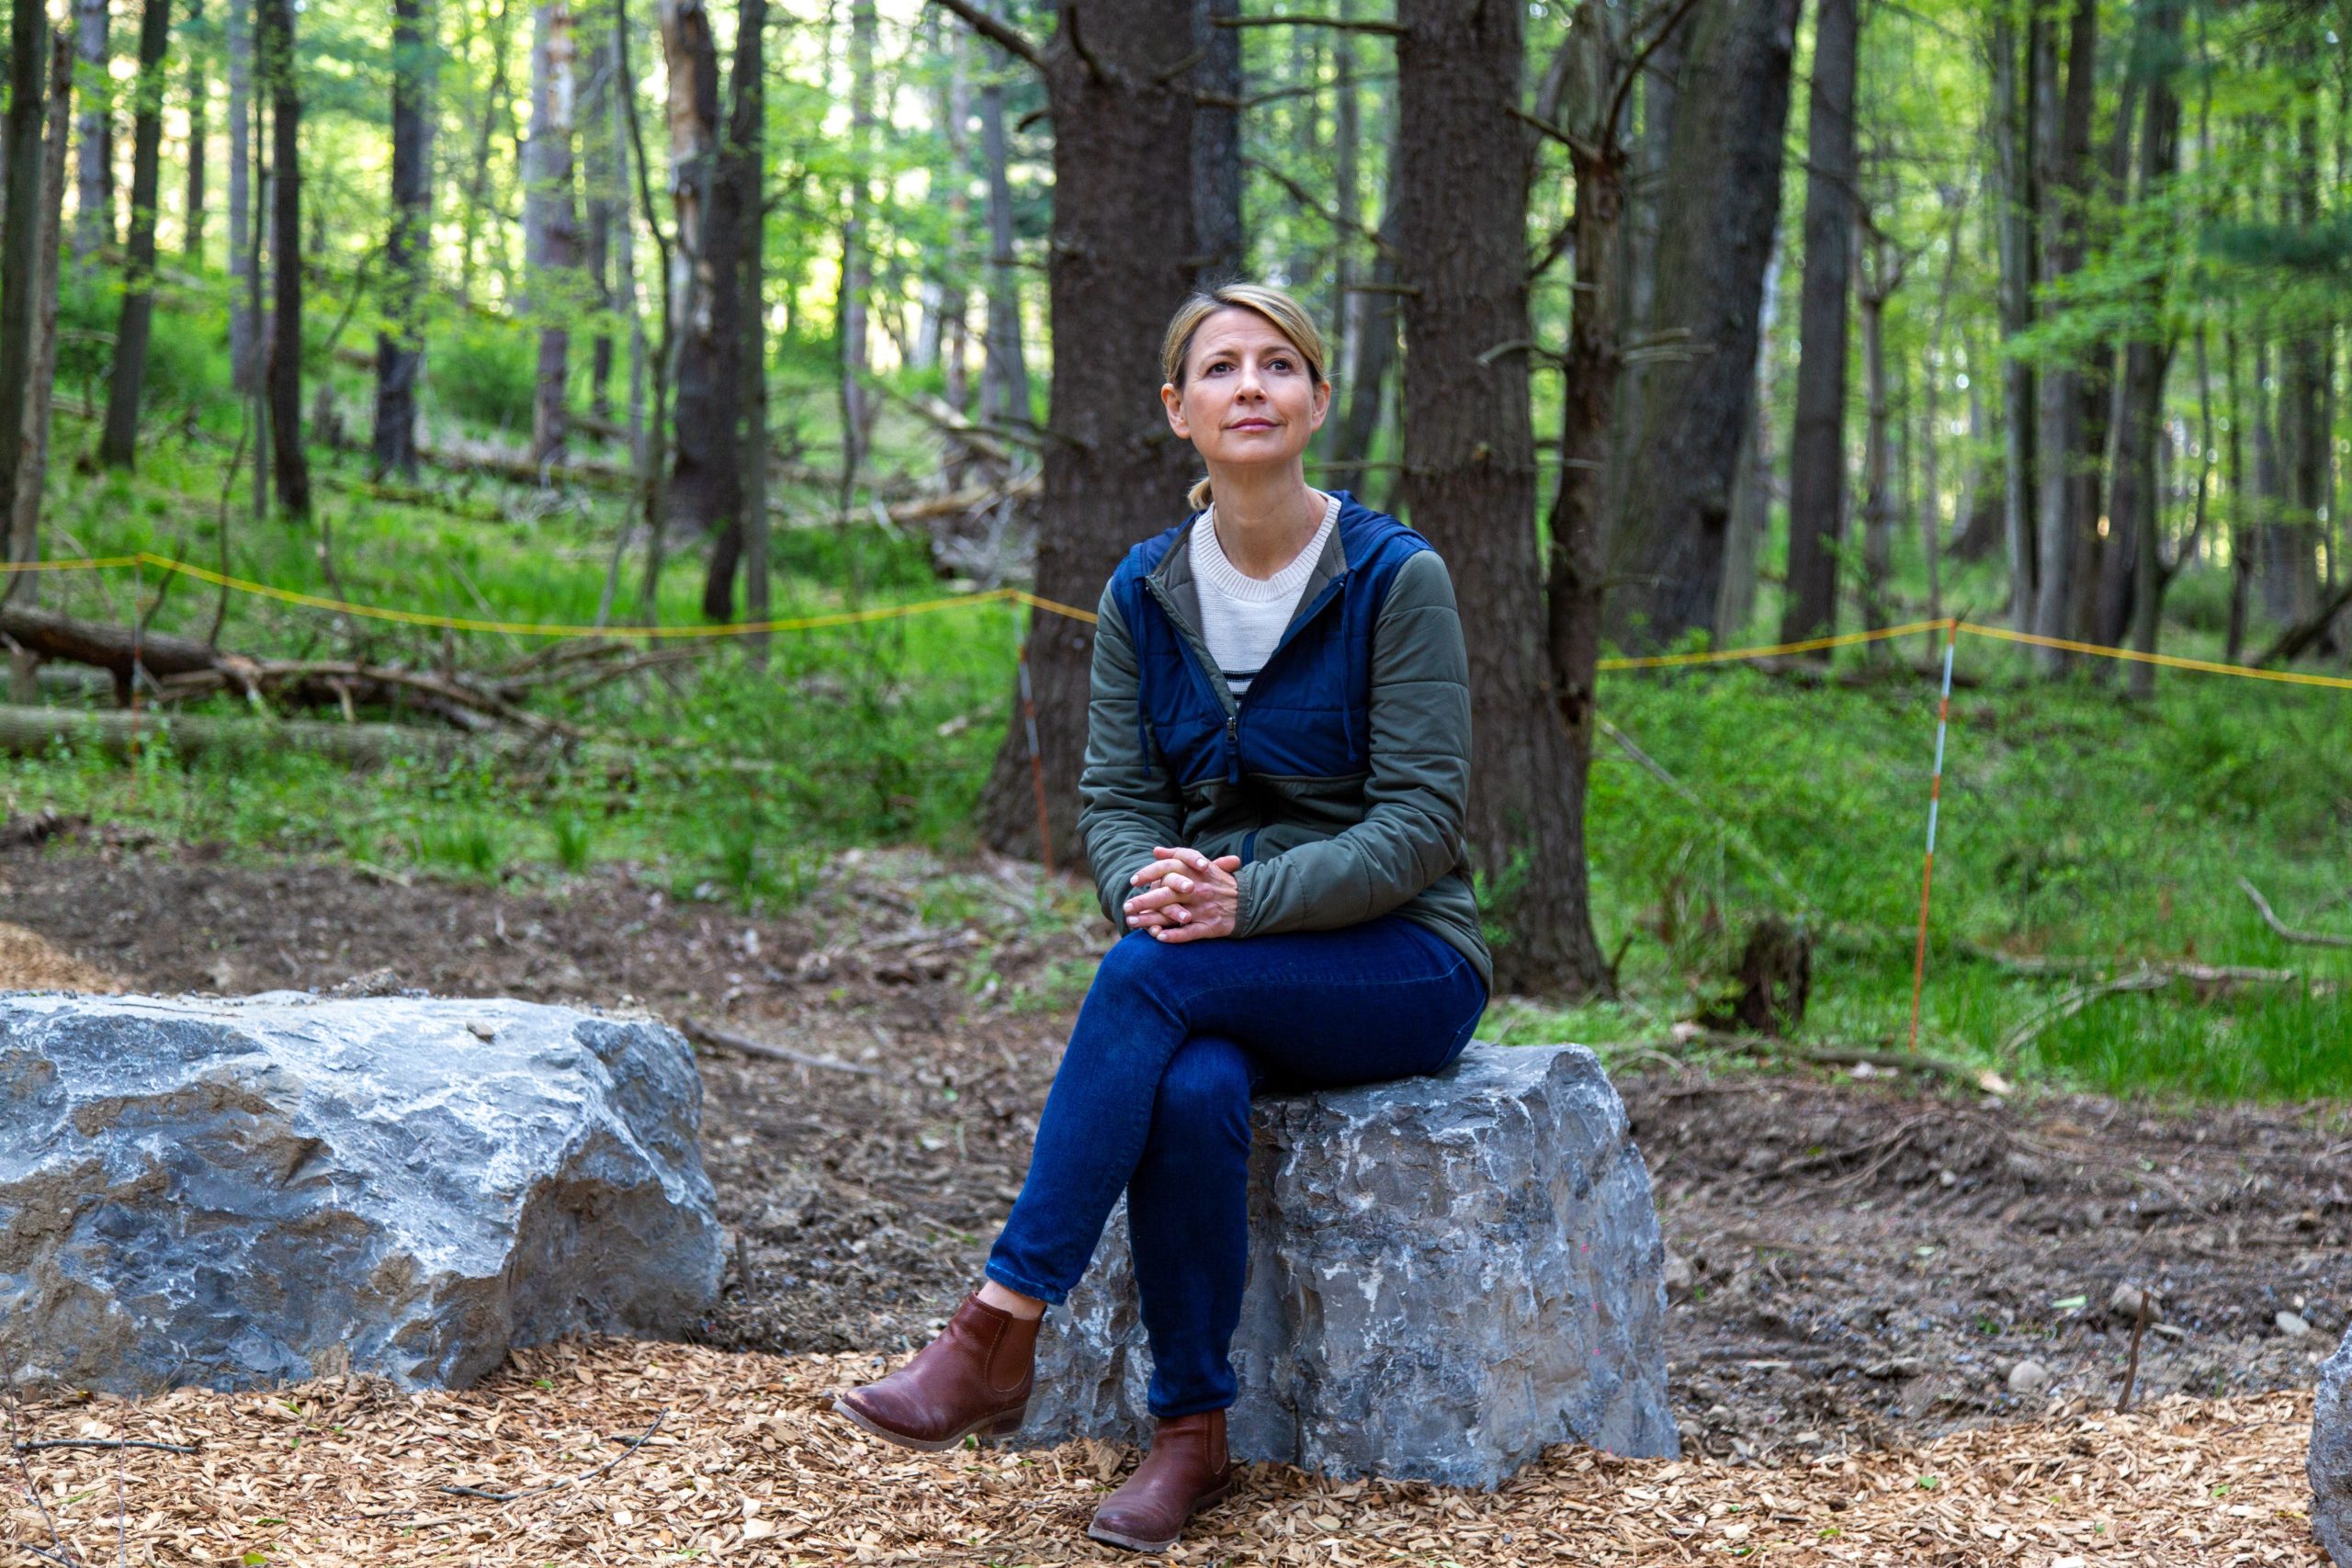 Samantha Brown at the Autism Nature Trail in New York